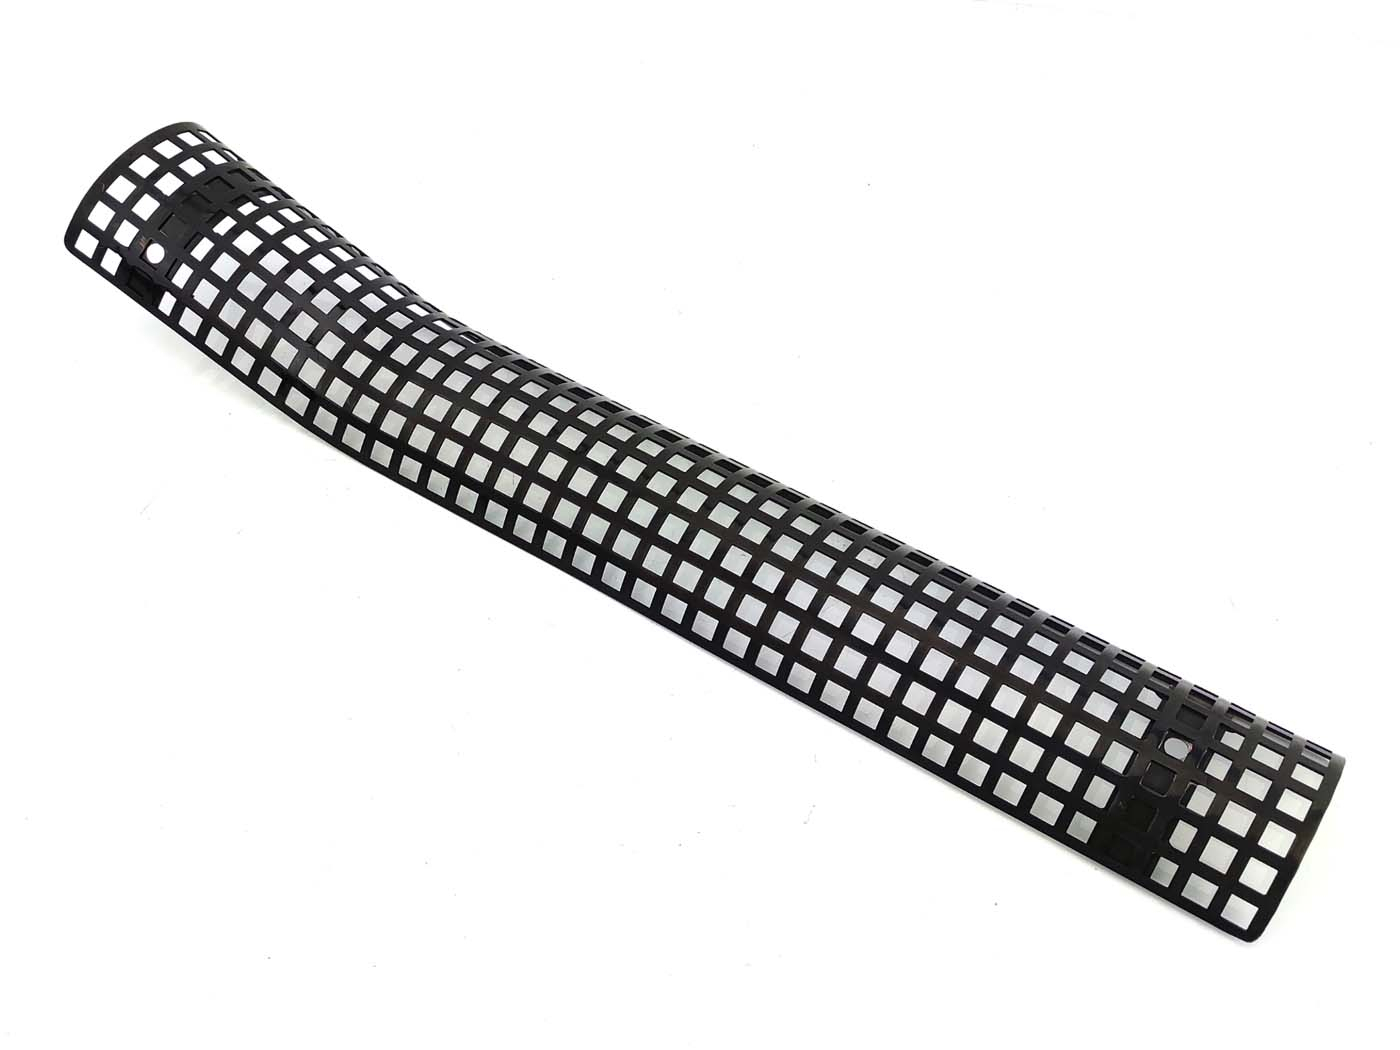 Exhaust Protection Grille For Hercules K 180 BW